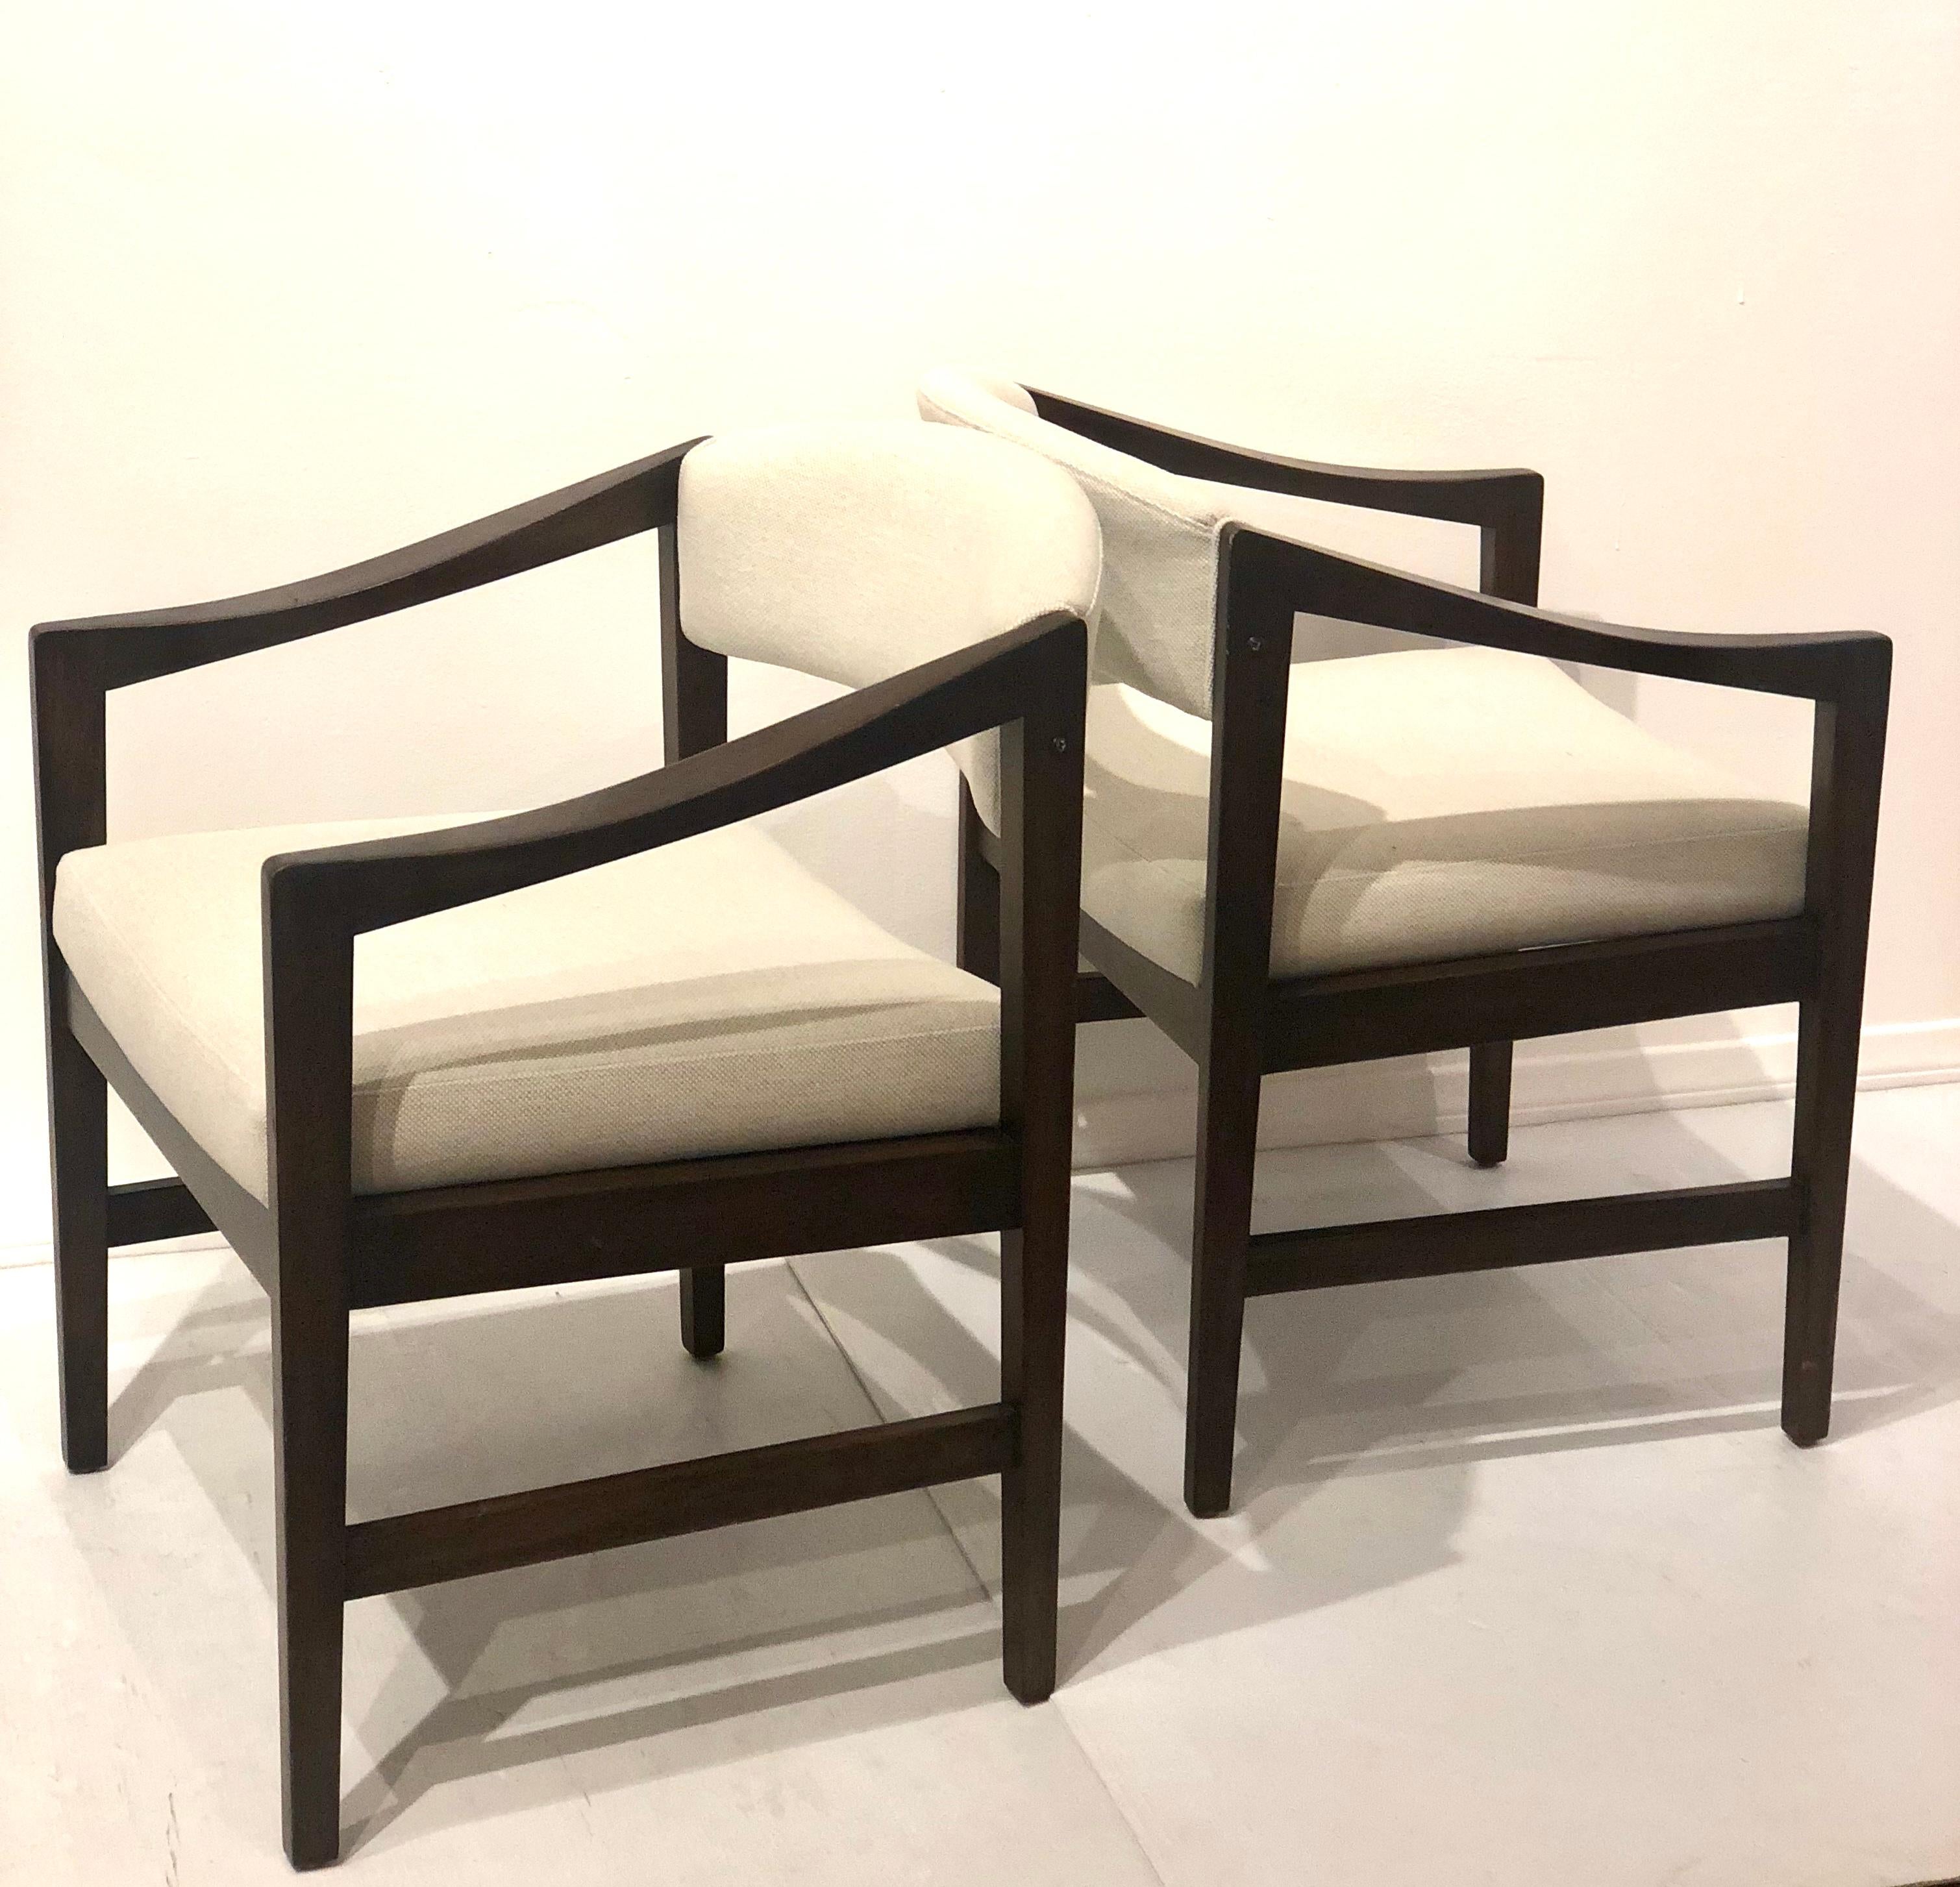 Open frame lounge chairs by Edward Wormley for Dunbar. Mahogany frames with rosewood finish and cream color new upholstery, nice condition solid and sturdy.